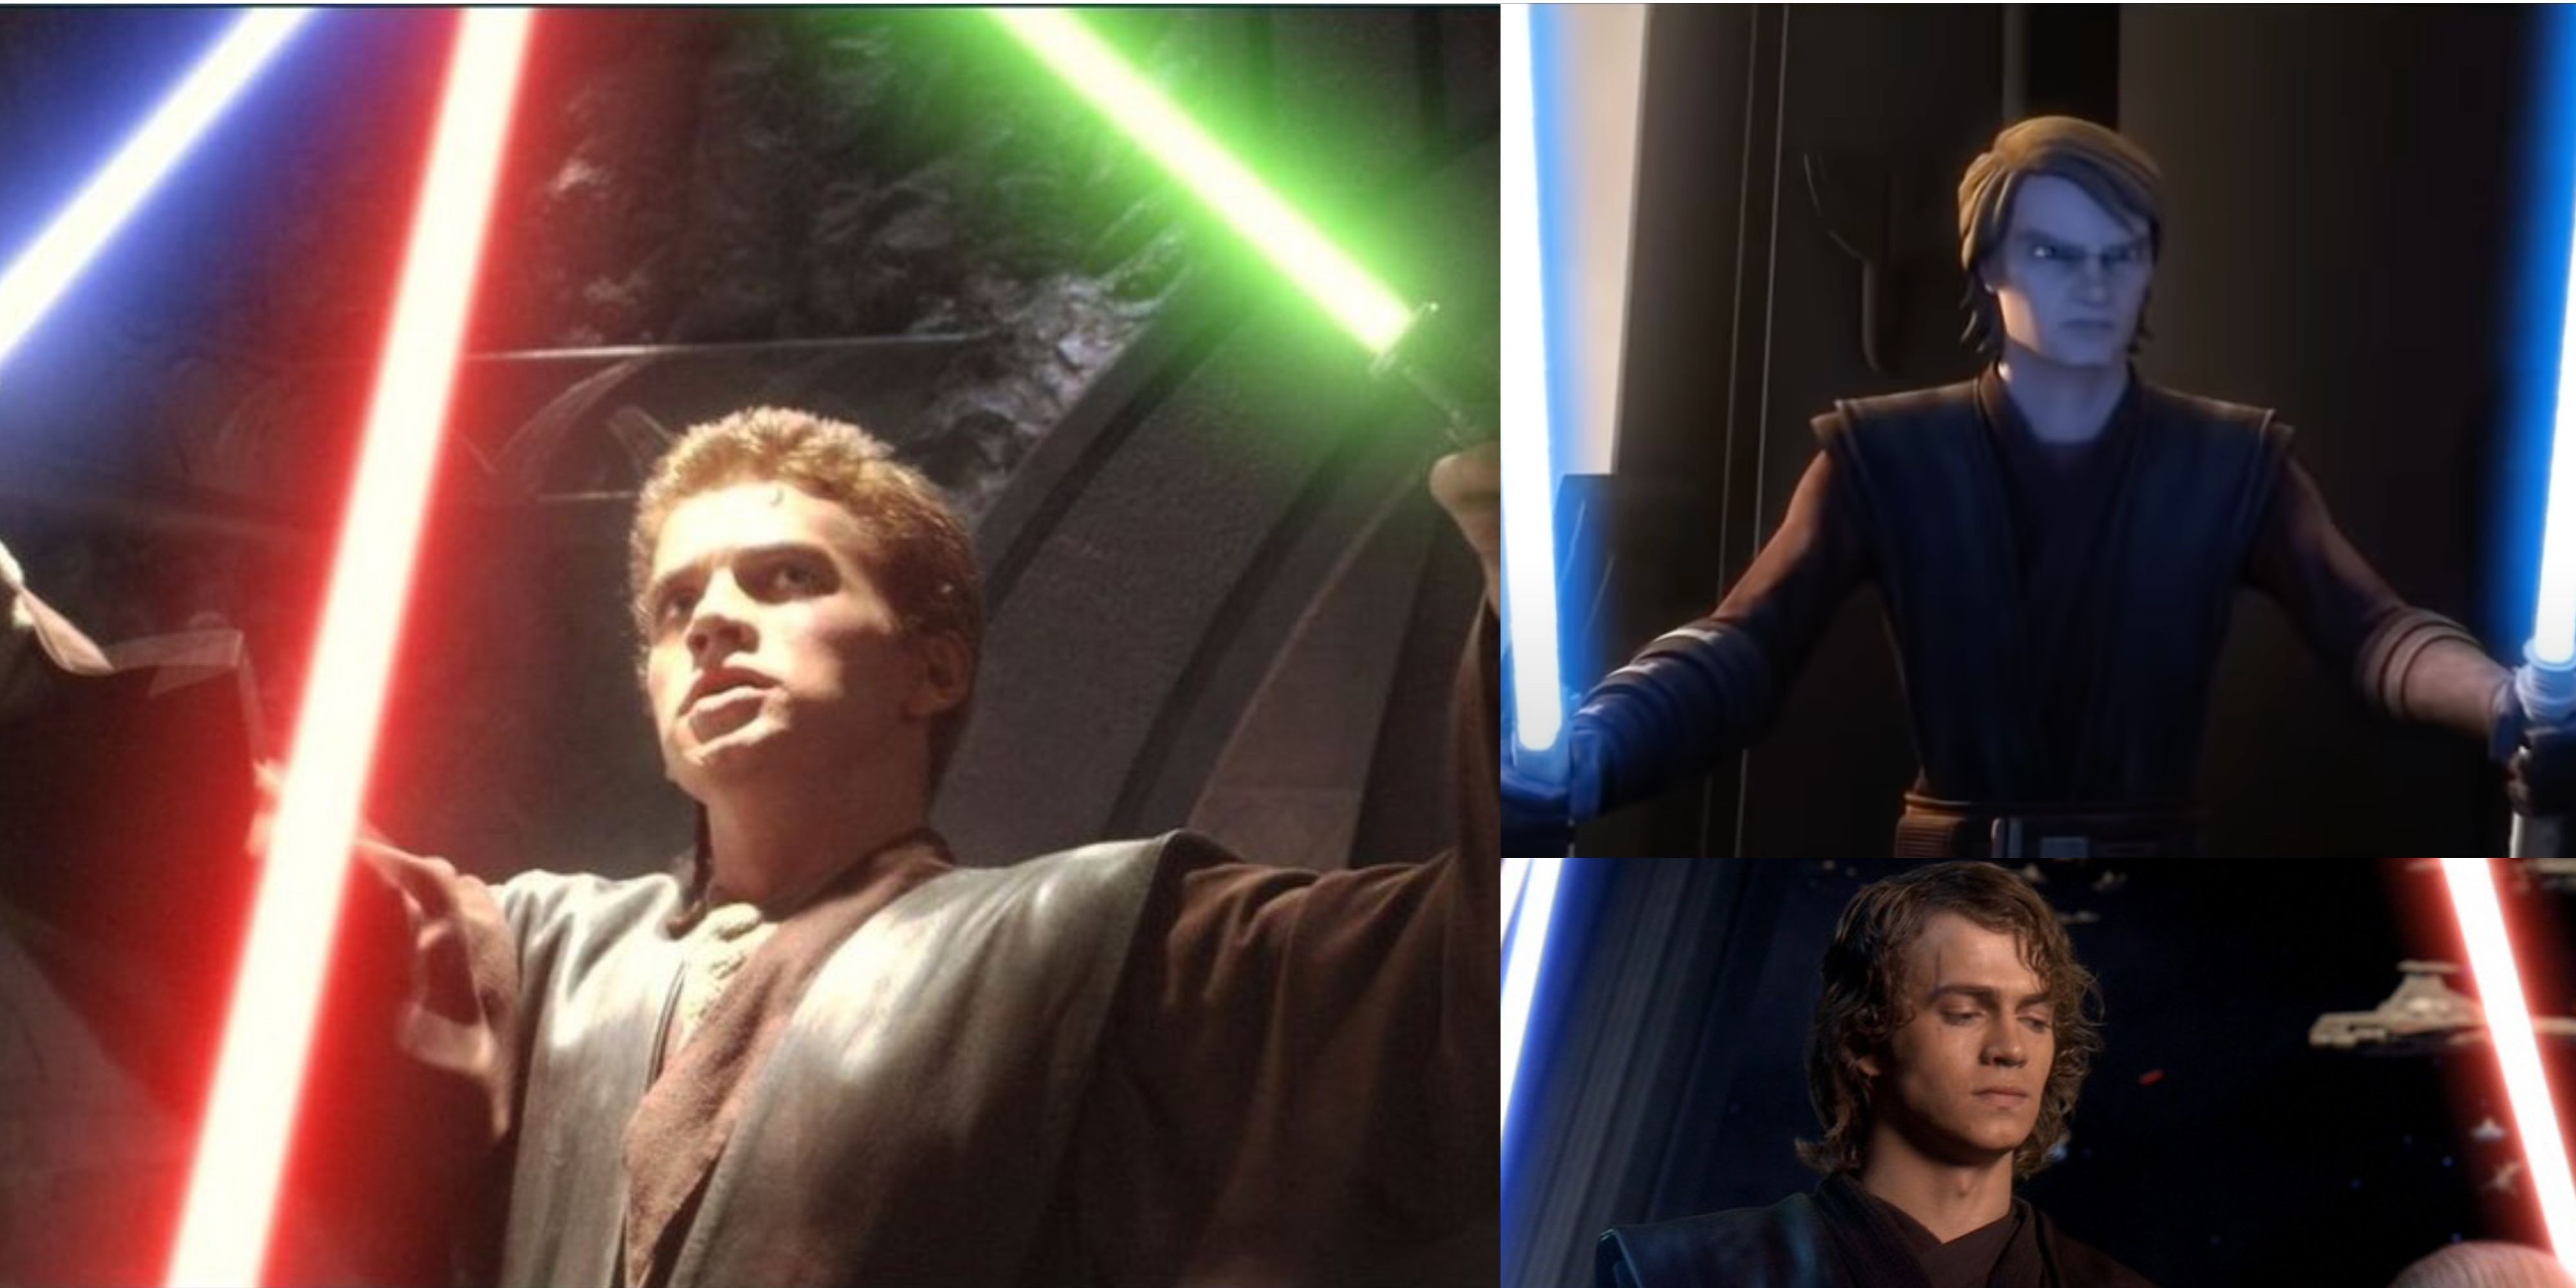 Anakin duels Count Dooku, and Barriss offee